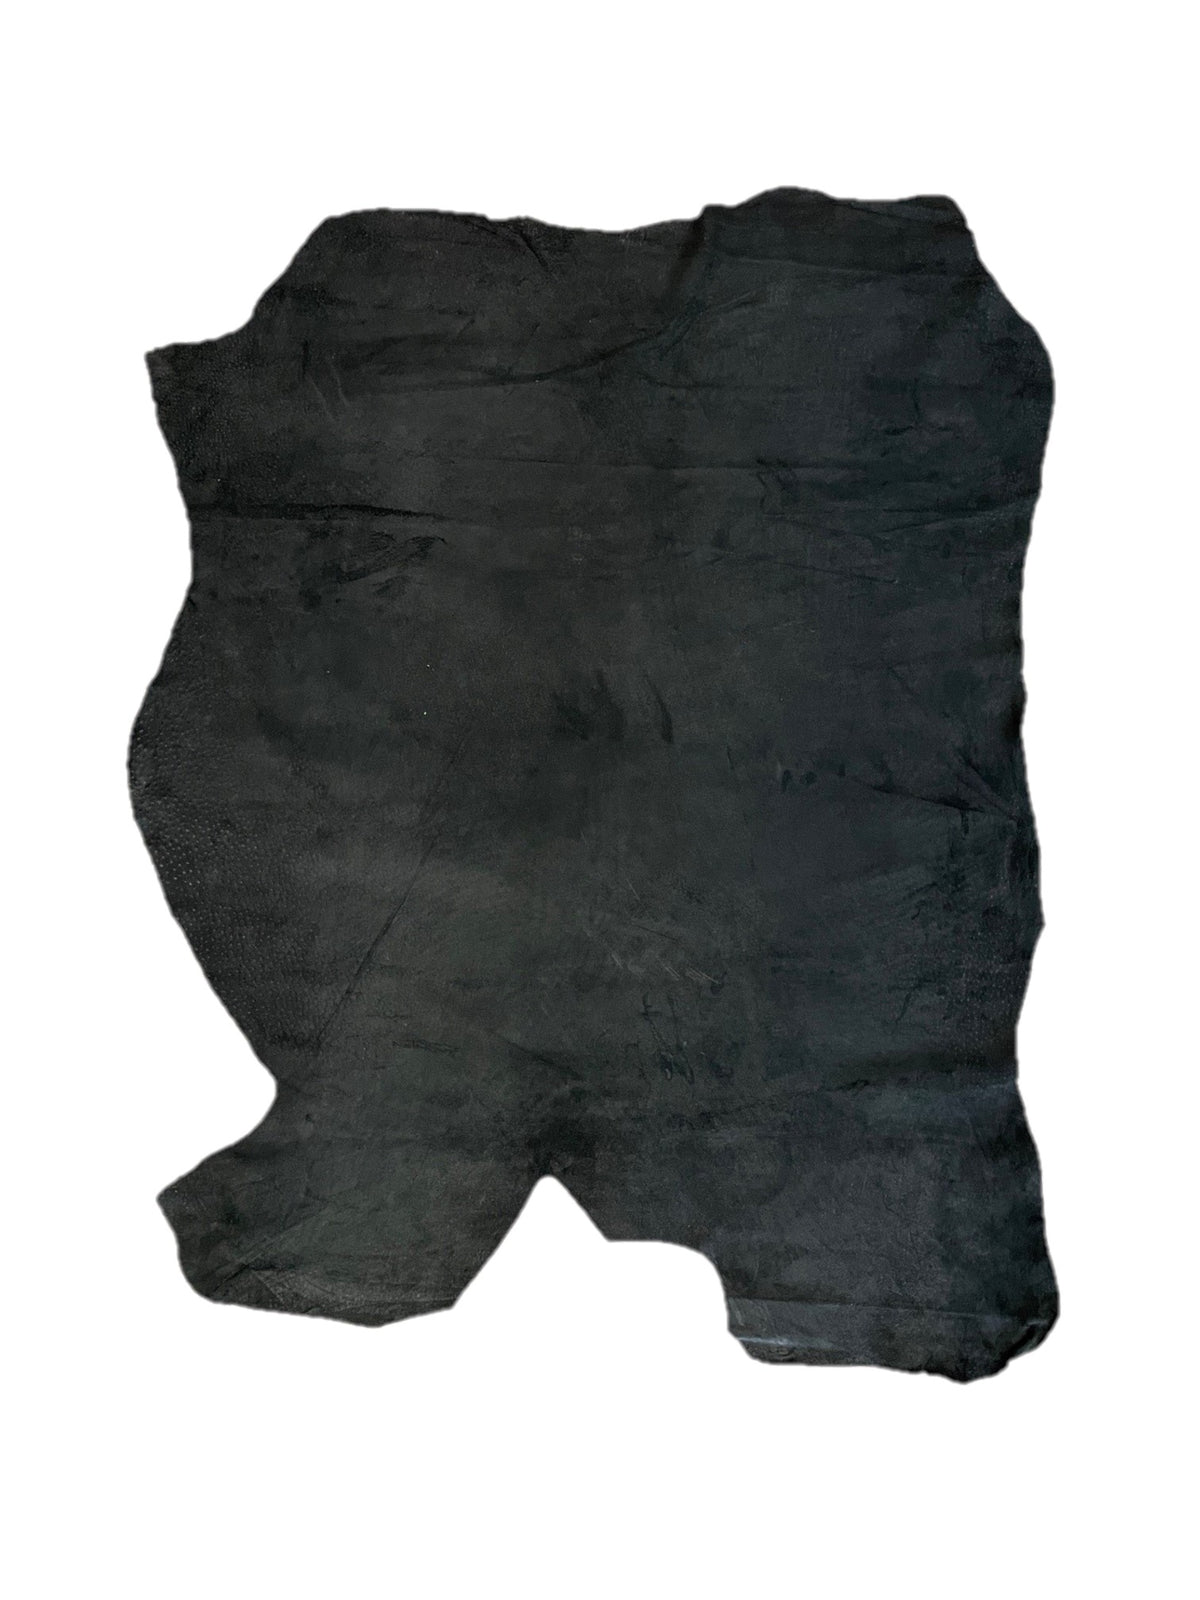 Pig Skin Suede | Black | 0.6 mm | 8 sq.ft | From $25 ea.